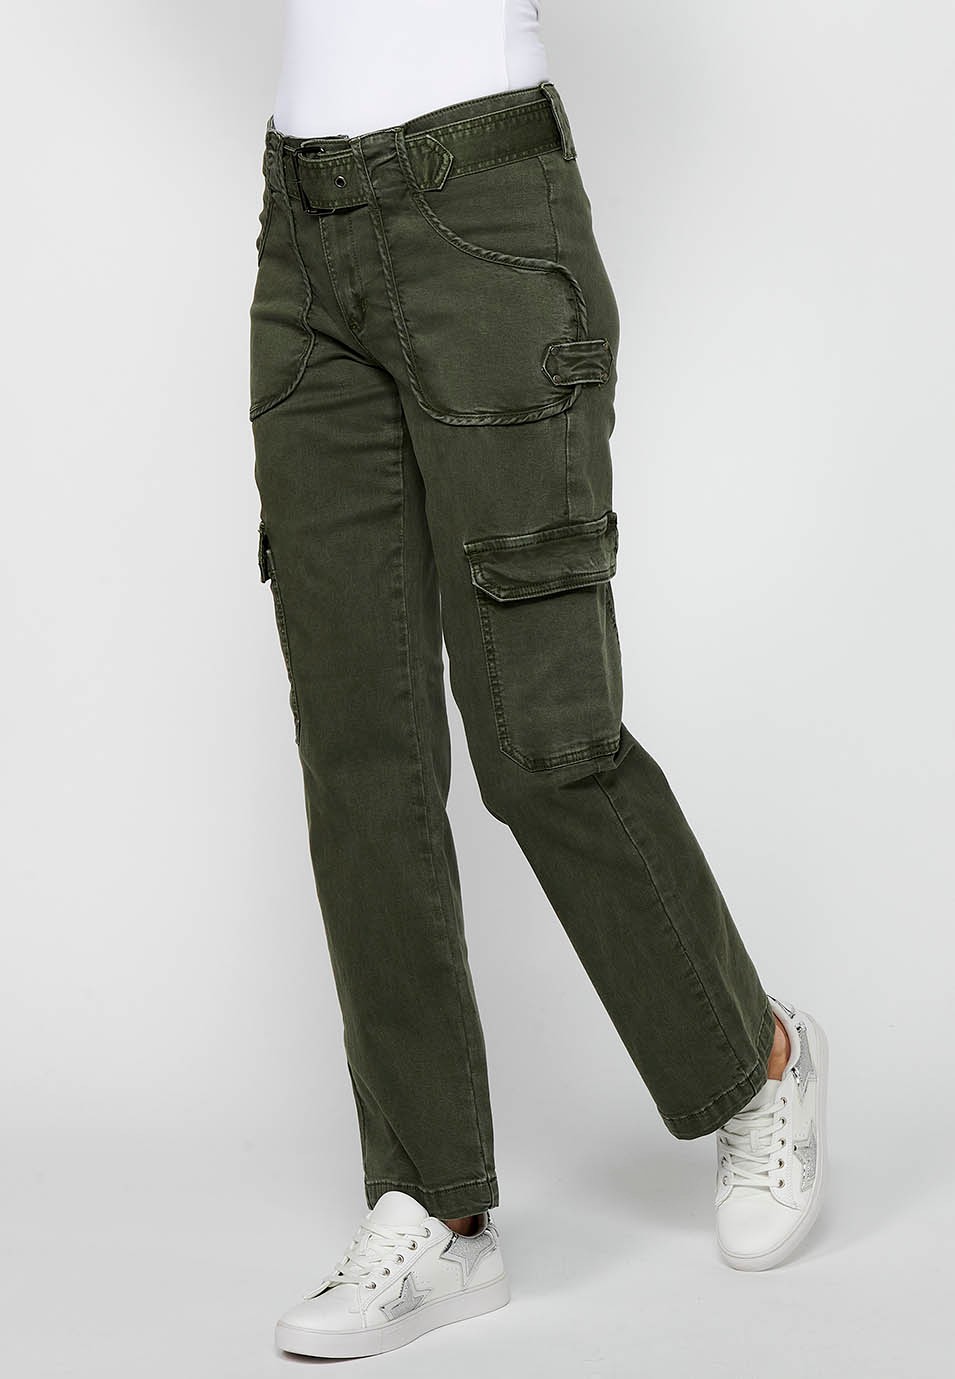 Long straight-cut pants with front zipper closure and button with patch pockets in Khaki Color for Women 2